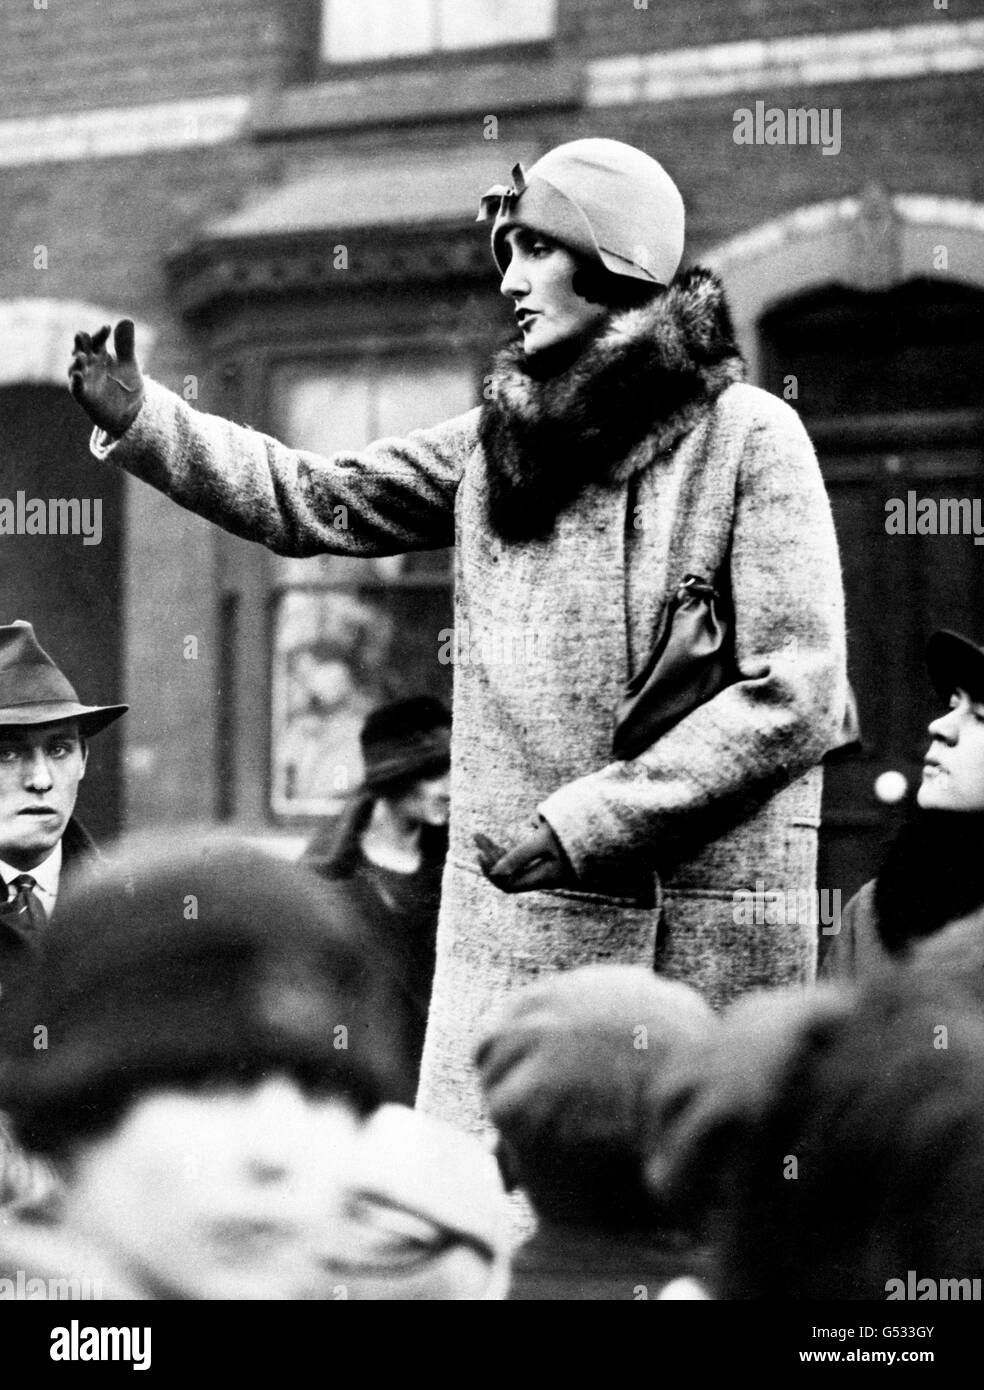 Lady Mosley c1934 speaking at a meeting on behalf of Sir Oswald Mosley's party. * 28/11/02: Lady Diana Mosley speaking at a meeting on behalf of her husband, Sir Oswald Mosley's. Lady Mosley was deemed more dangerous than her husband according to secret documents published by the Public Record Office in Kew, west London. 14/11/2003: Lady Diana Mosley, the wife of the 1930's fascist leader Sir Oswald Mosley, was interned following the direct intervention of her former father-in-law, according to secret papers made public, Friday November 14, 2003. Stock Photo